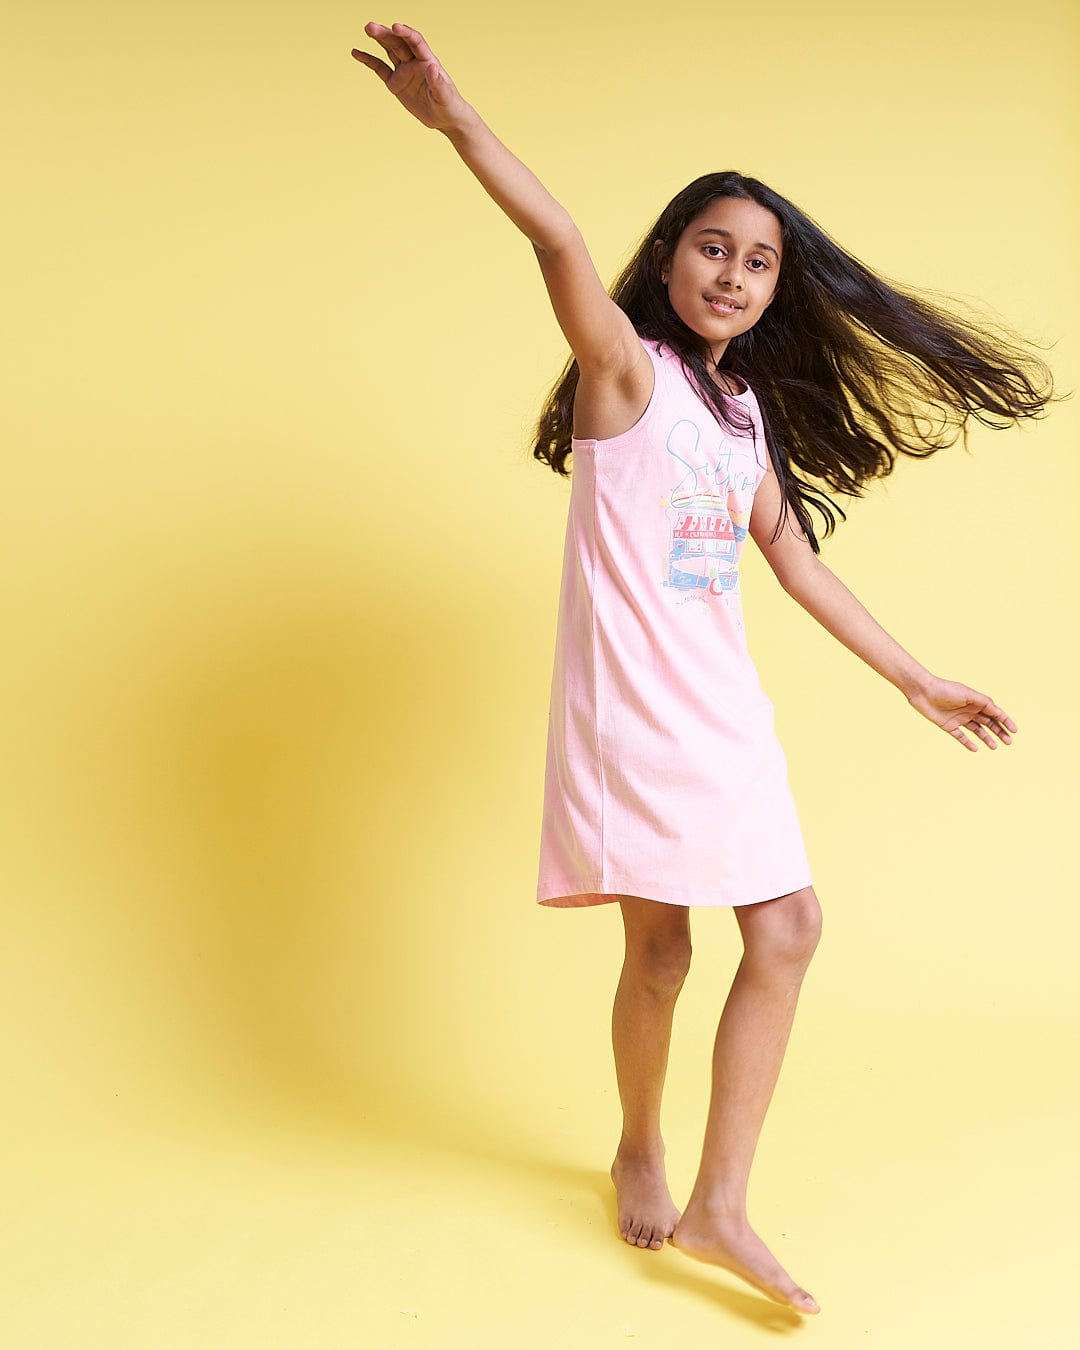 A girl in a Ice Cream Dreams - Kids Dress - Light Pink by Saltrock is dancing on a yellow background.